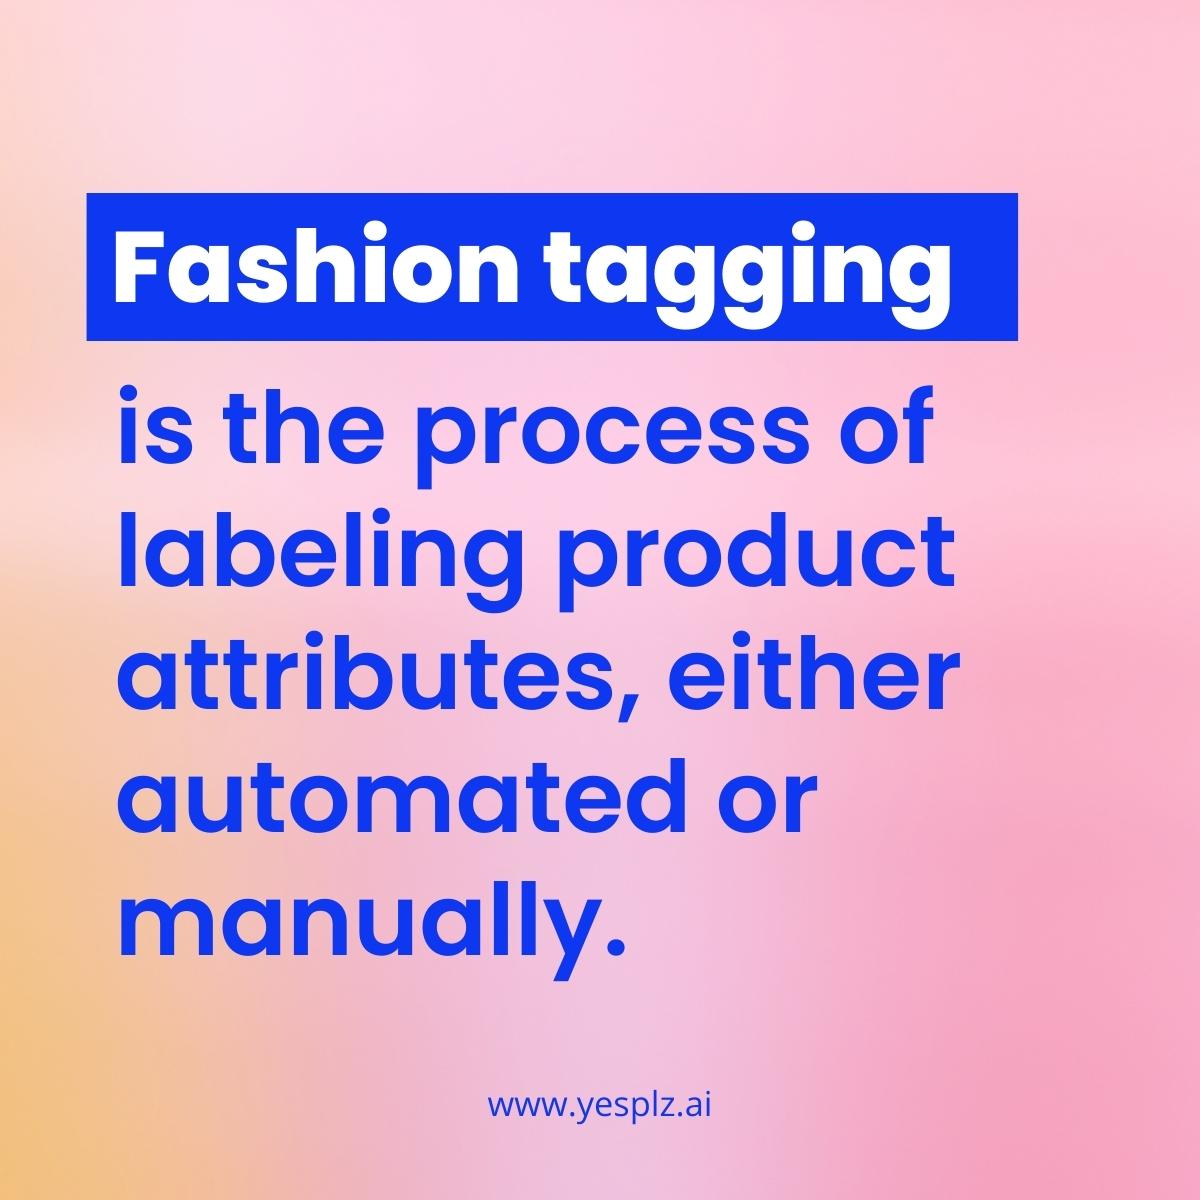 A definition of fashion tagging against a gradient background